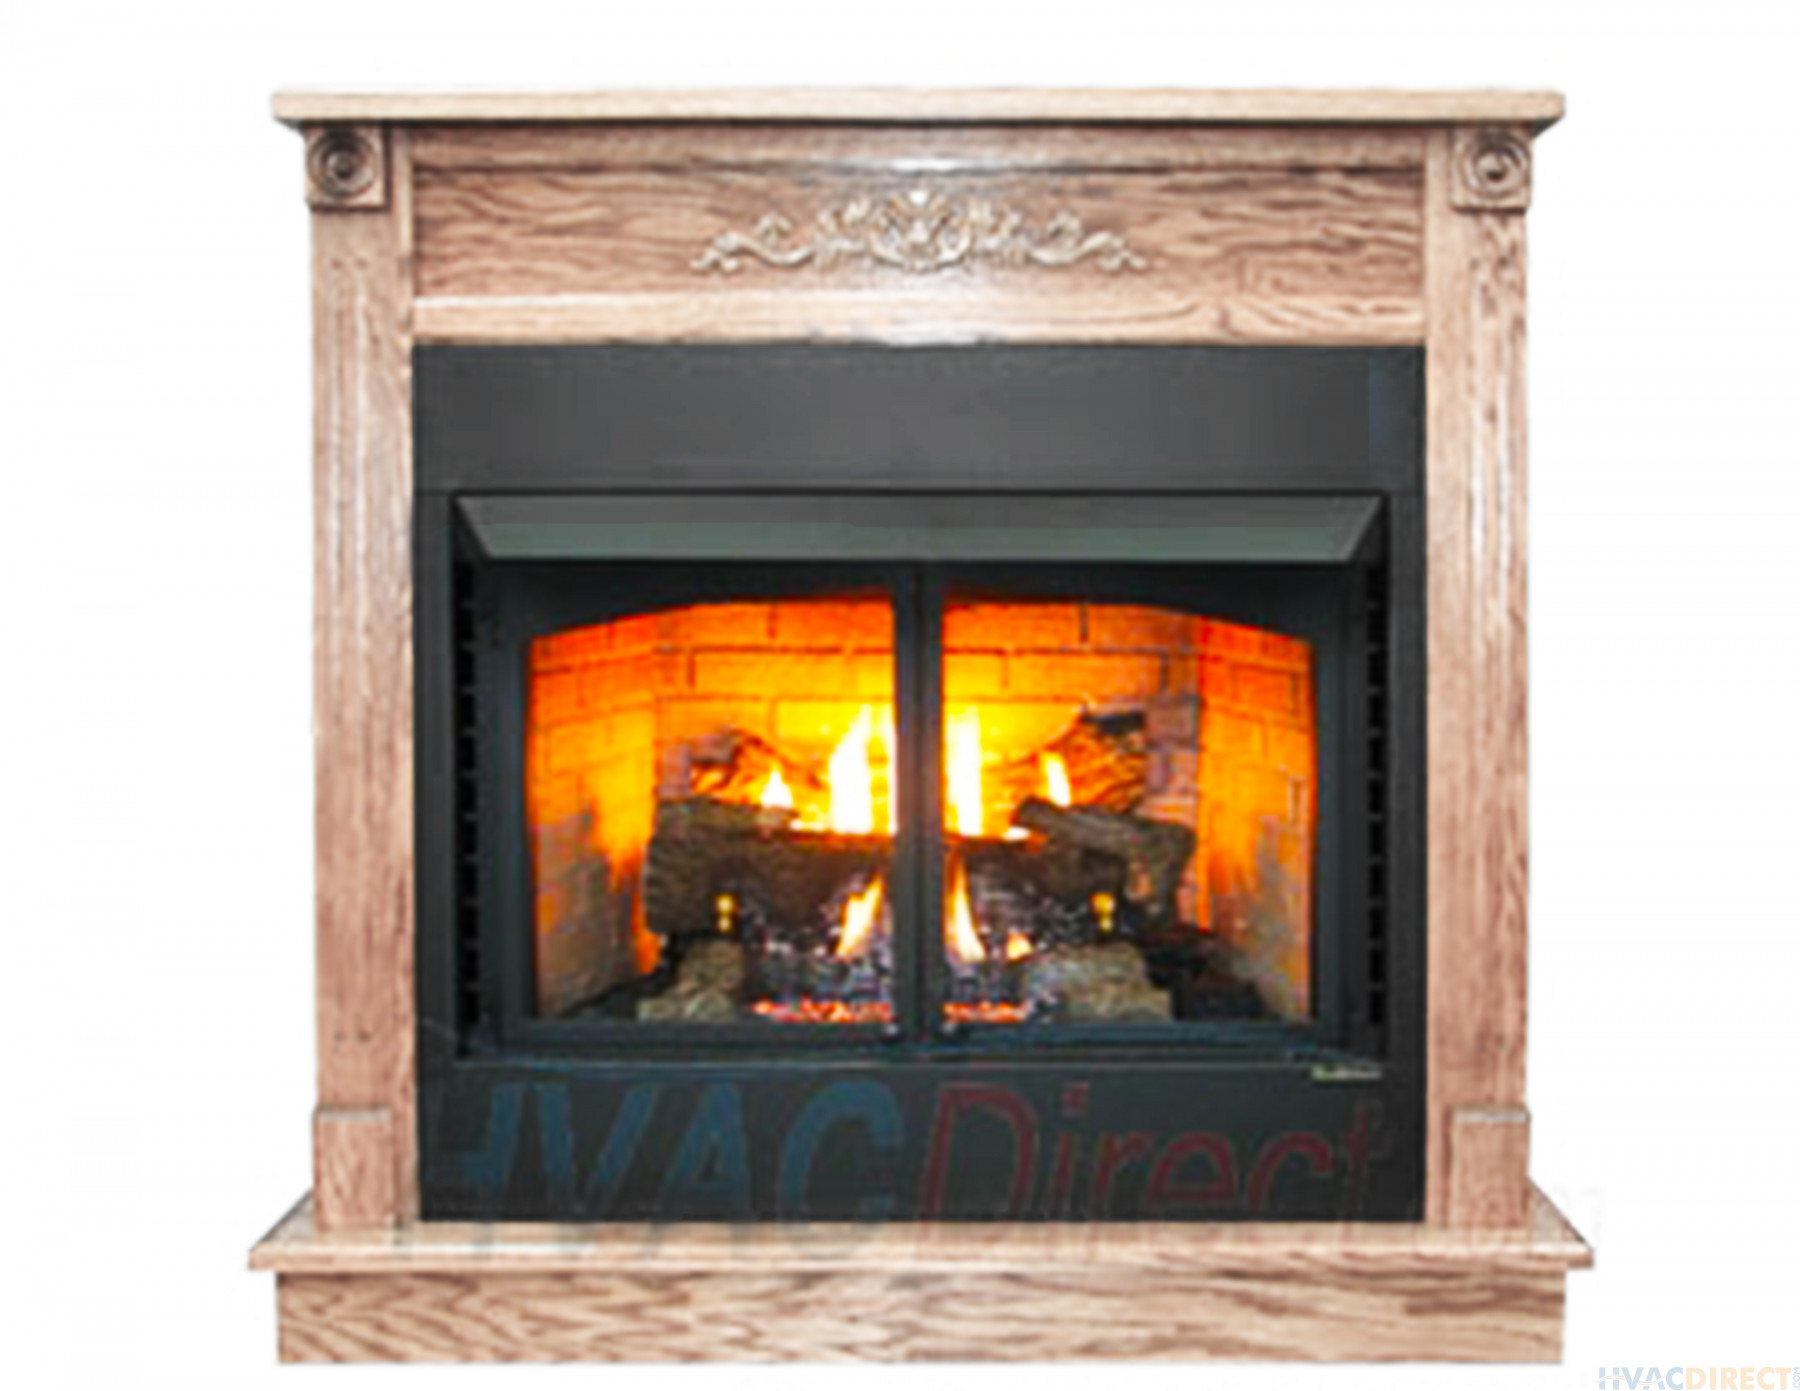 Buck Stove Model ZCBBXL 42" Vent Free Gas Stove Deluxe Builders Box with Oak Log Set - Natural Gas